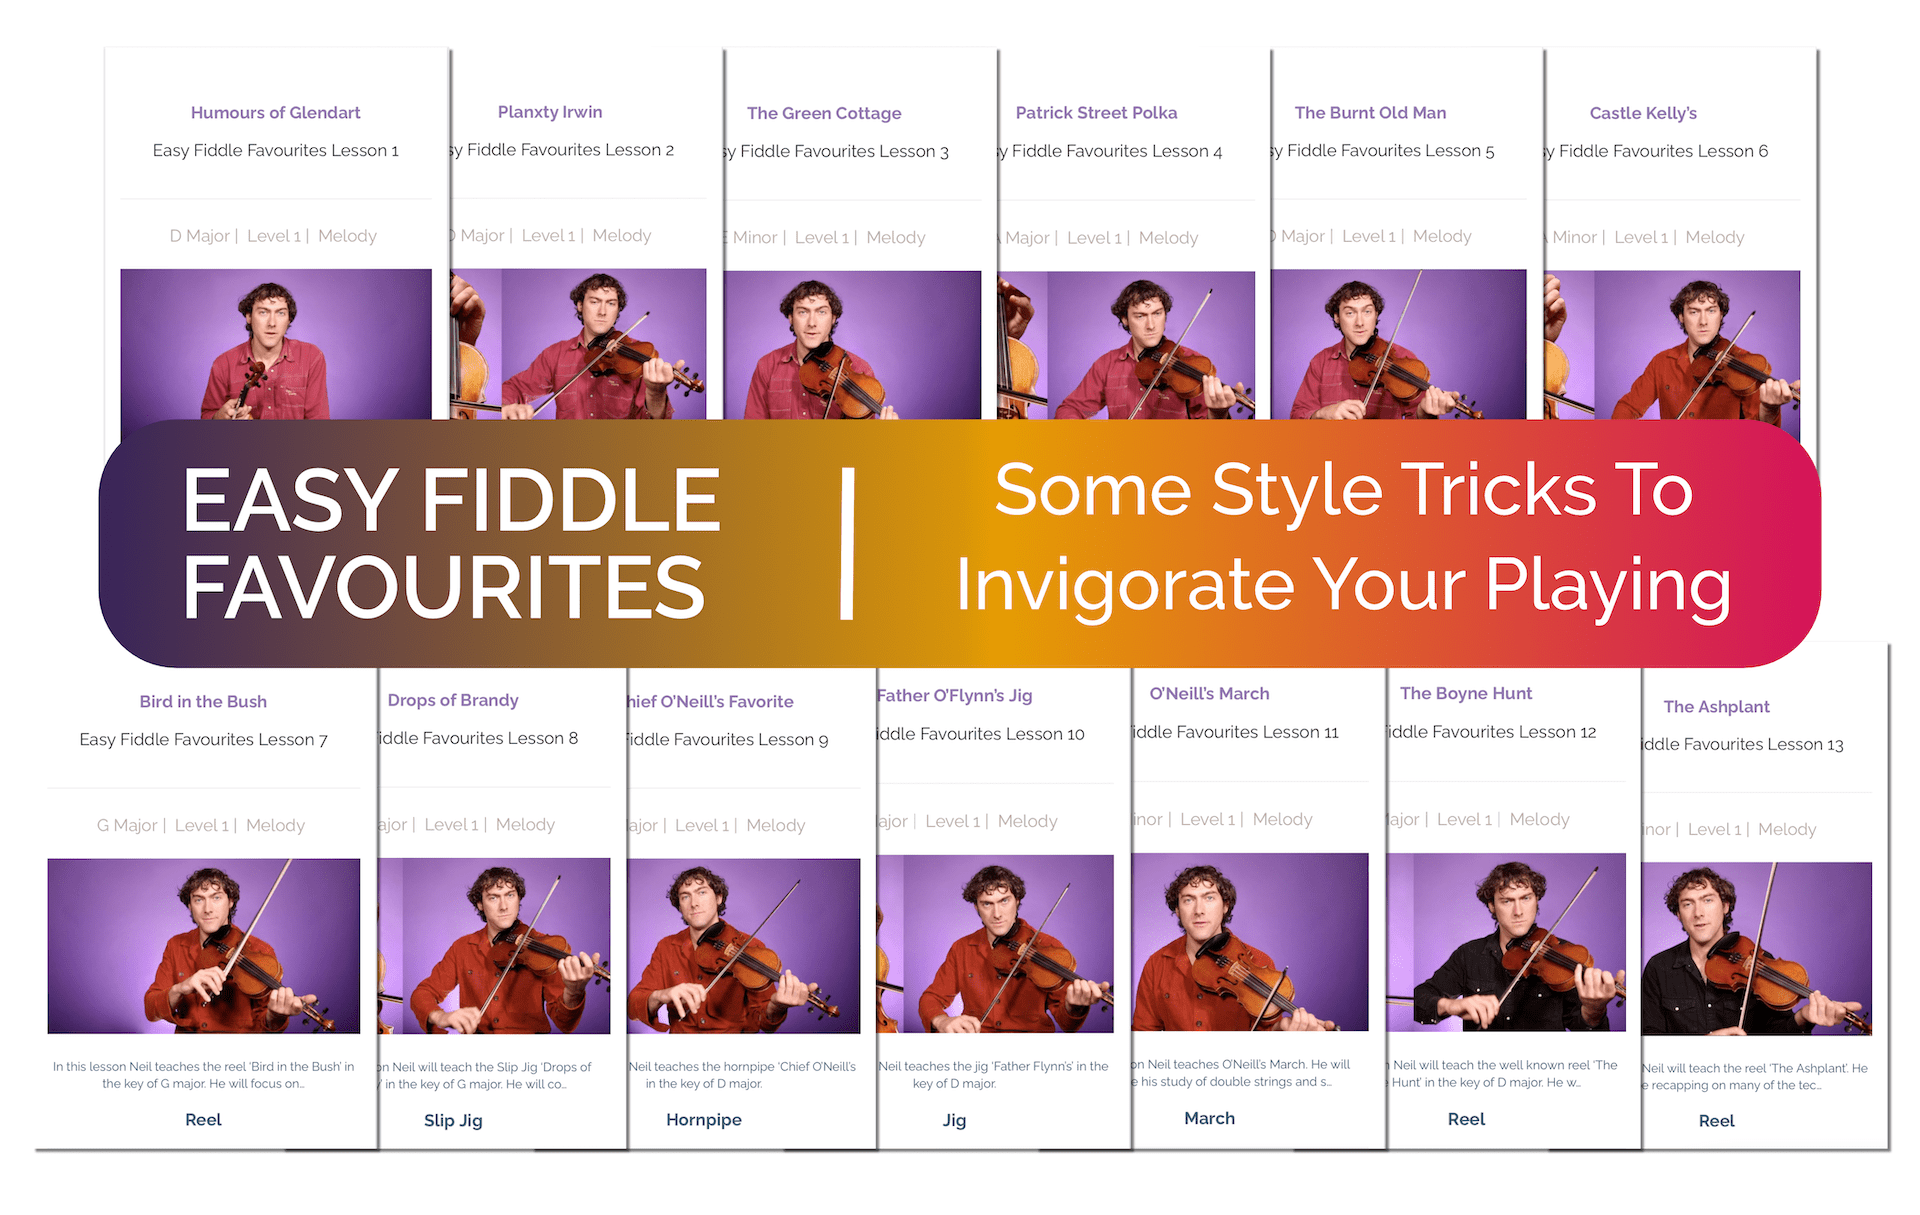 Irish Fiddle lesson images for course Easy Fiddle Favourites